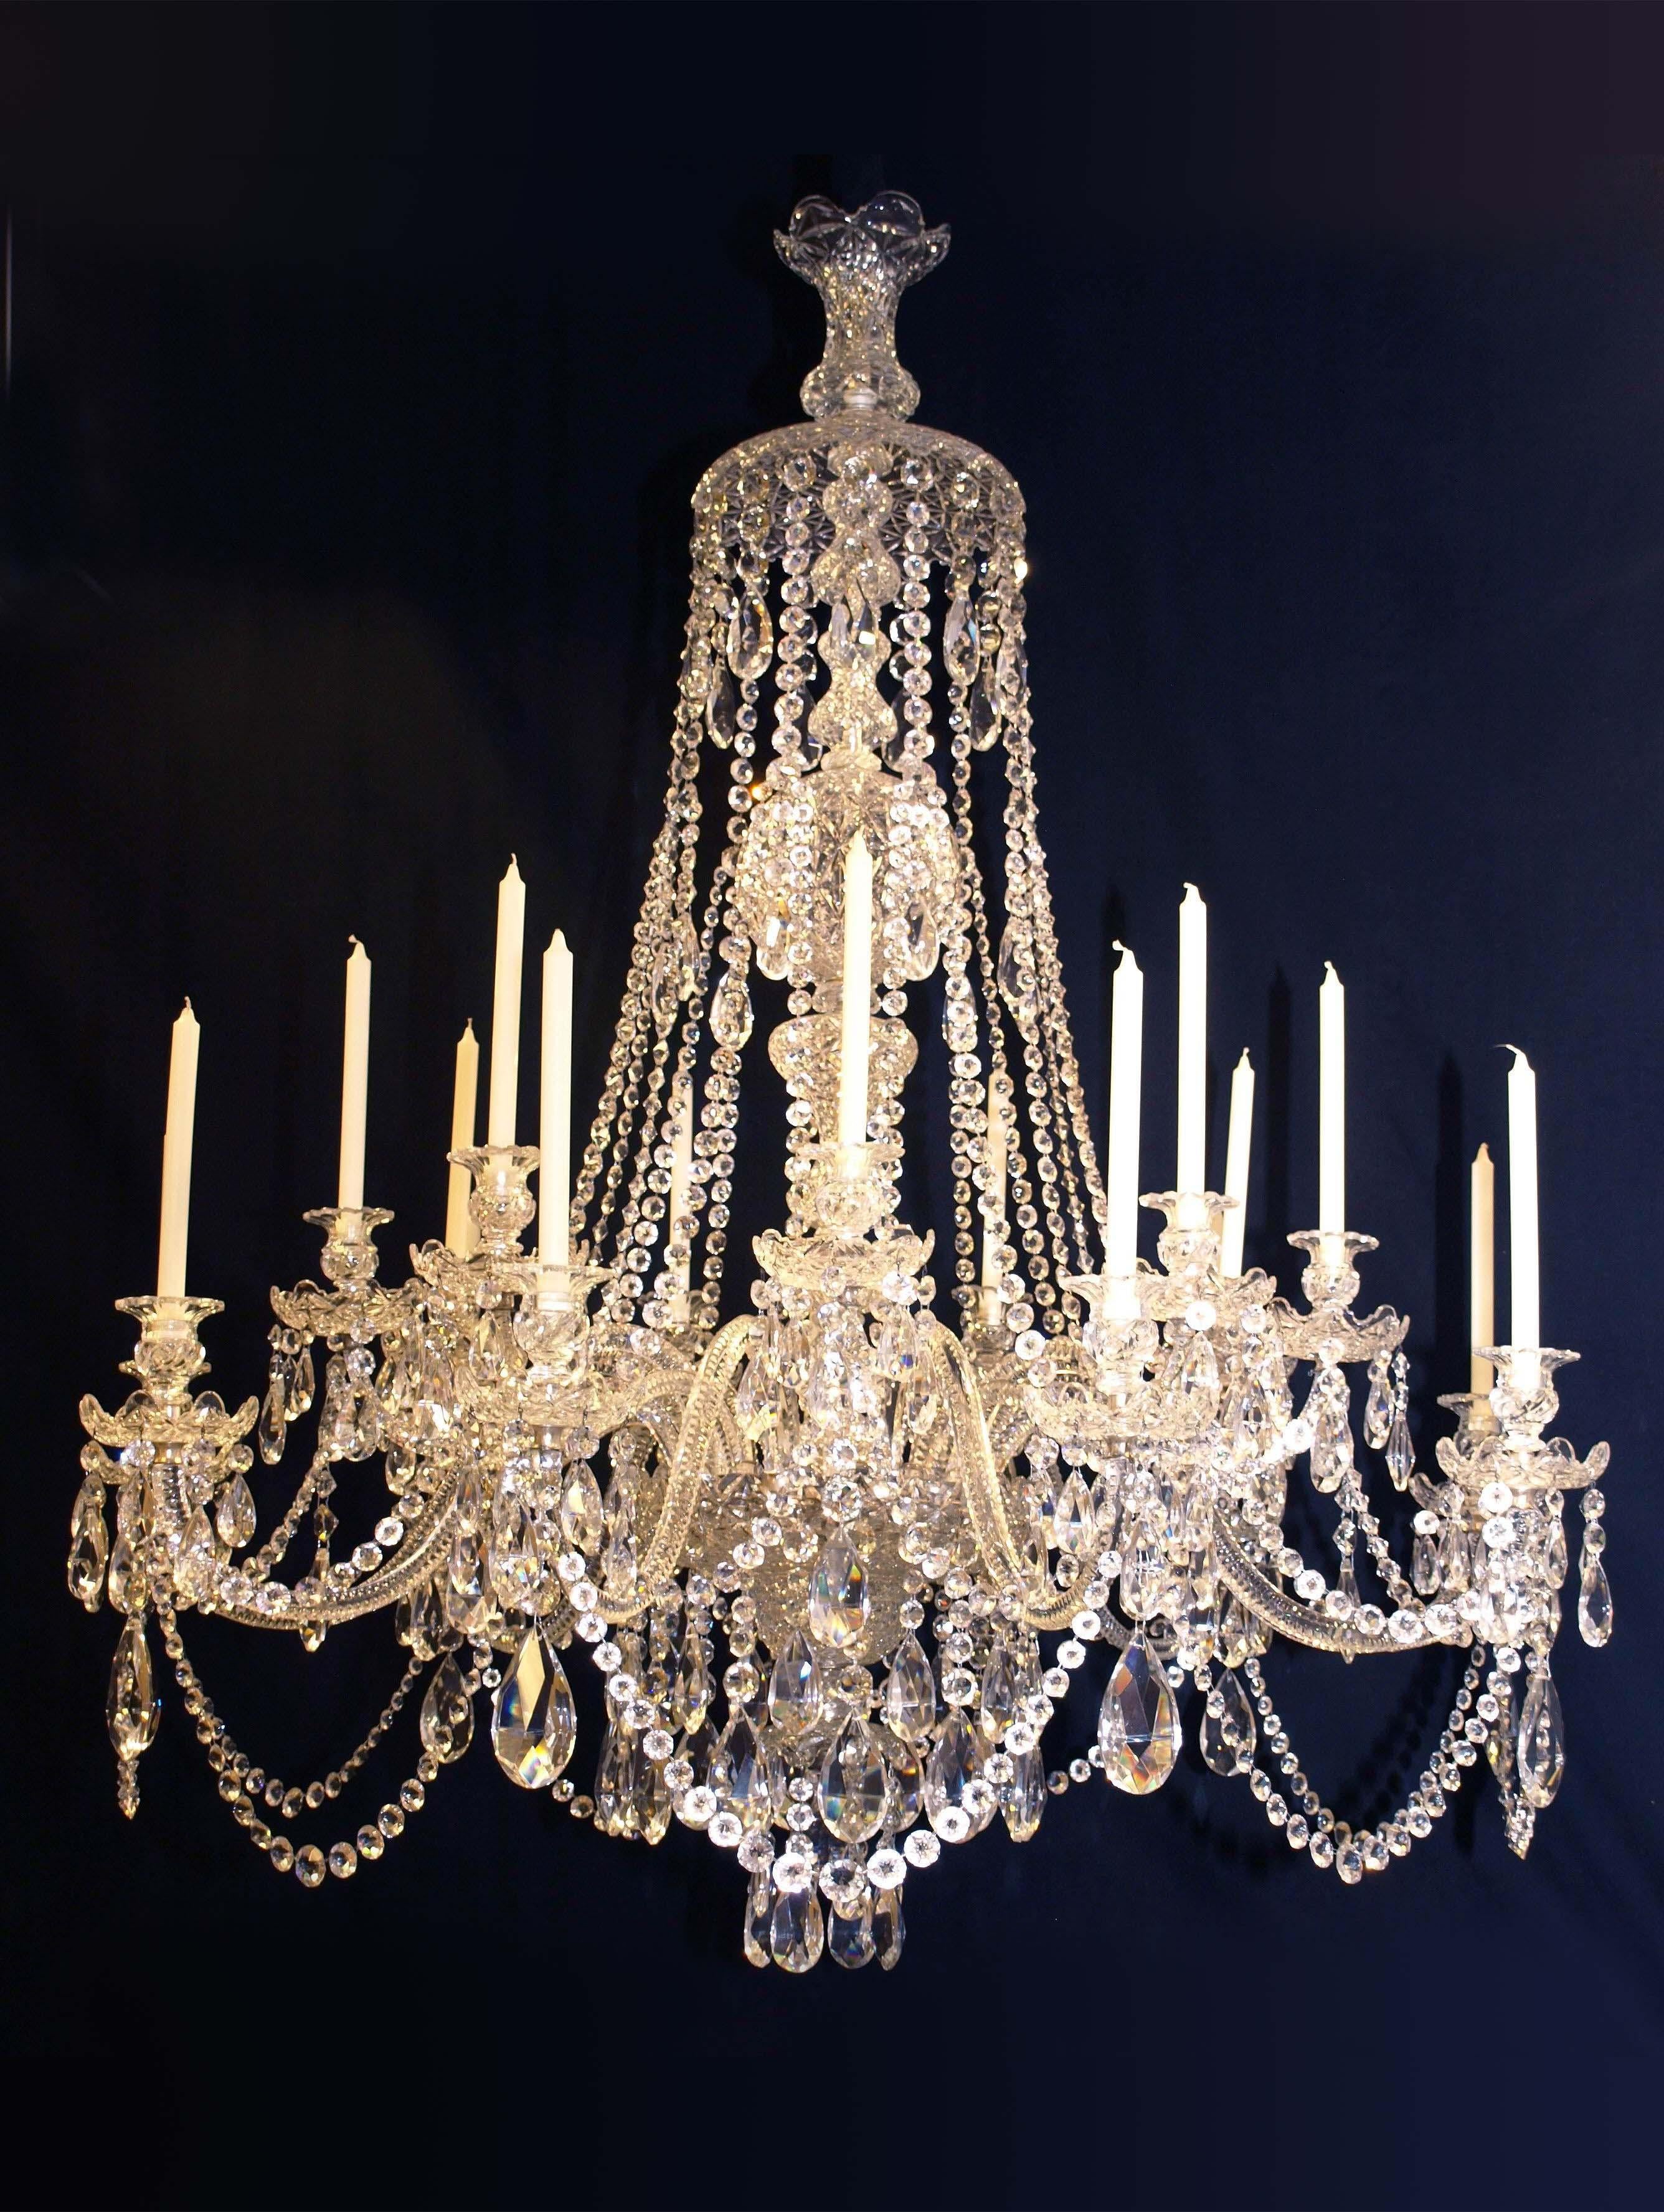 A superb 19th century Russian all handcut crystal chandelier with 18 lights, for candles.
CW3289.